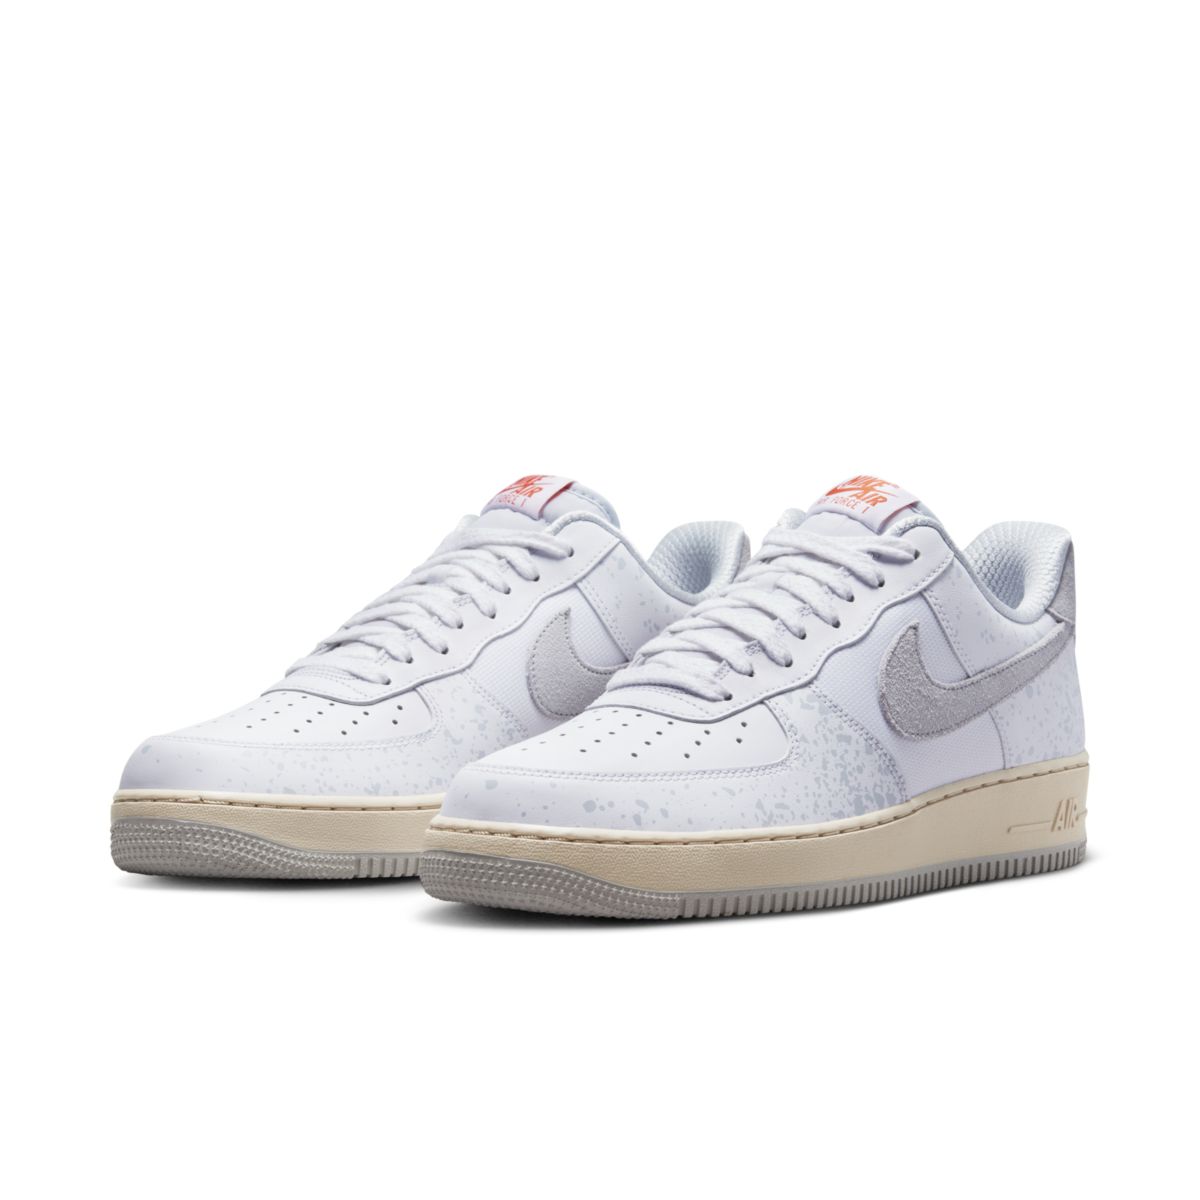 Nike Air Force 1 Low Spray Paint FD9758-100 4